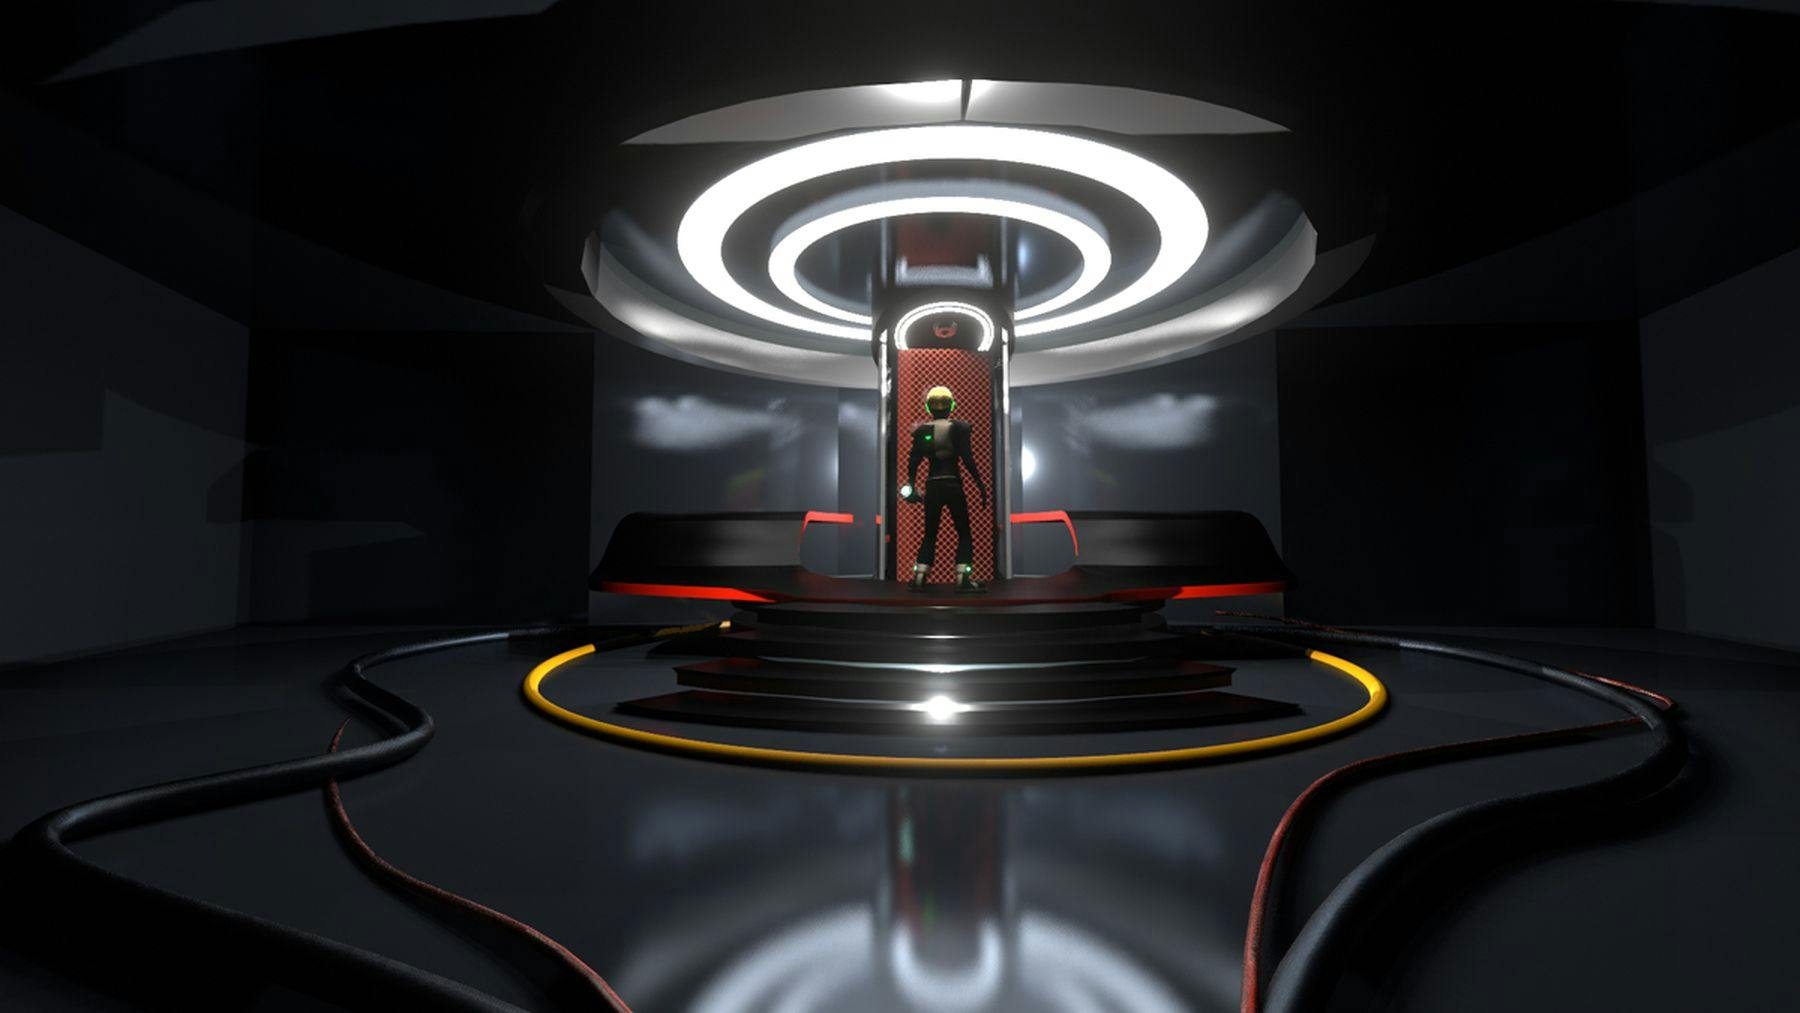 A digital drawing of a small figure stood on a platform in the middle of a large black room. The figure is wearing a bodysuit and helmet and there is a large white circular light above them.